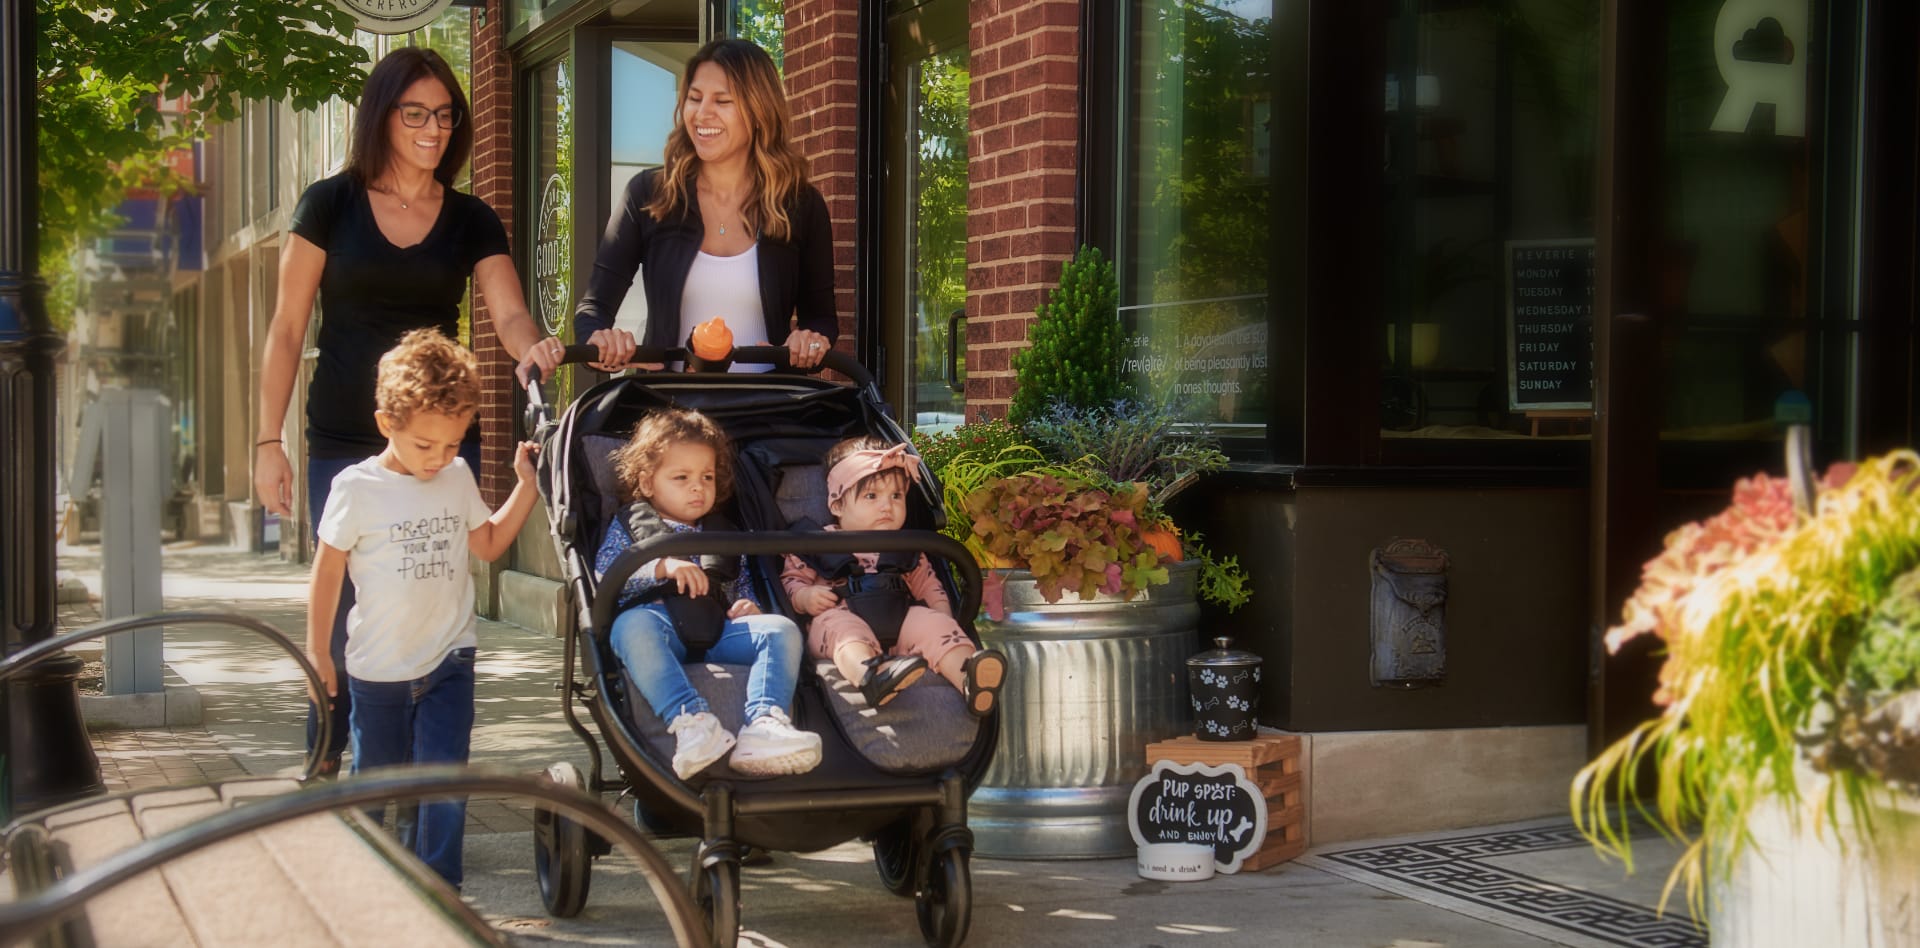 A two child stroller from the best in commercial strollers